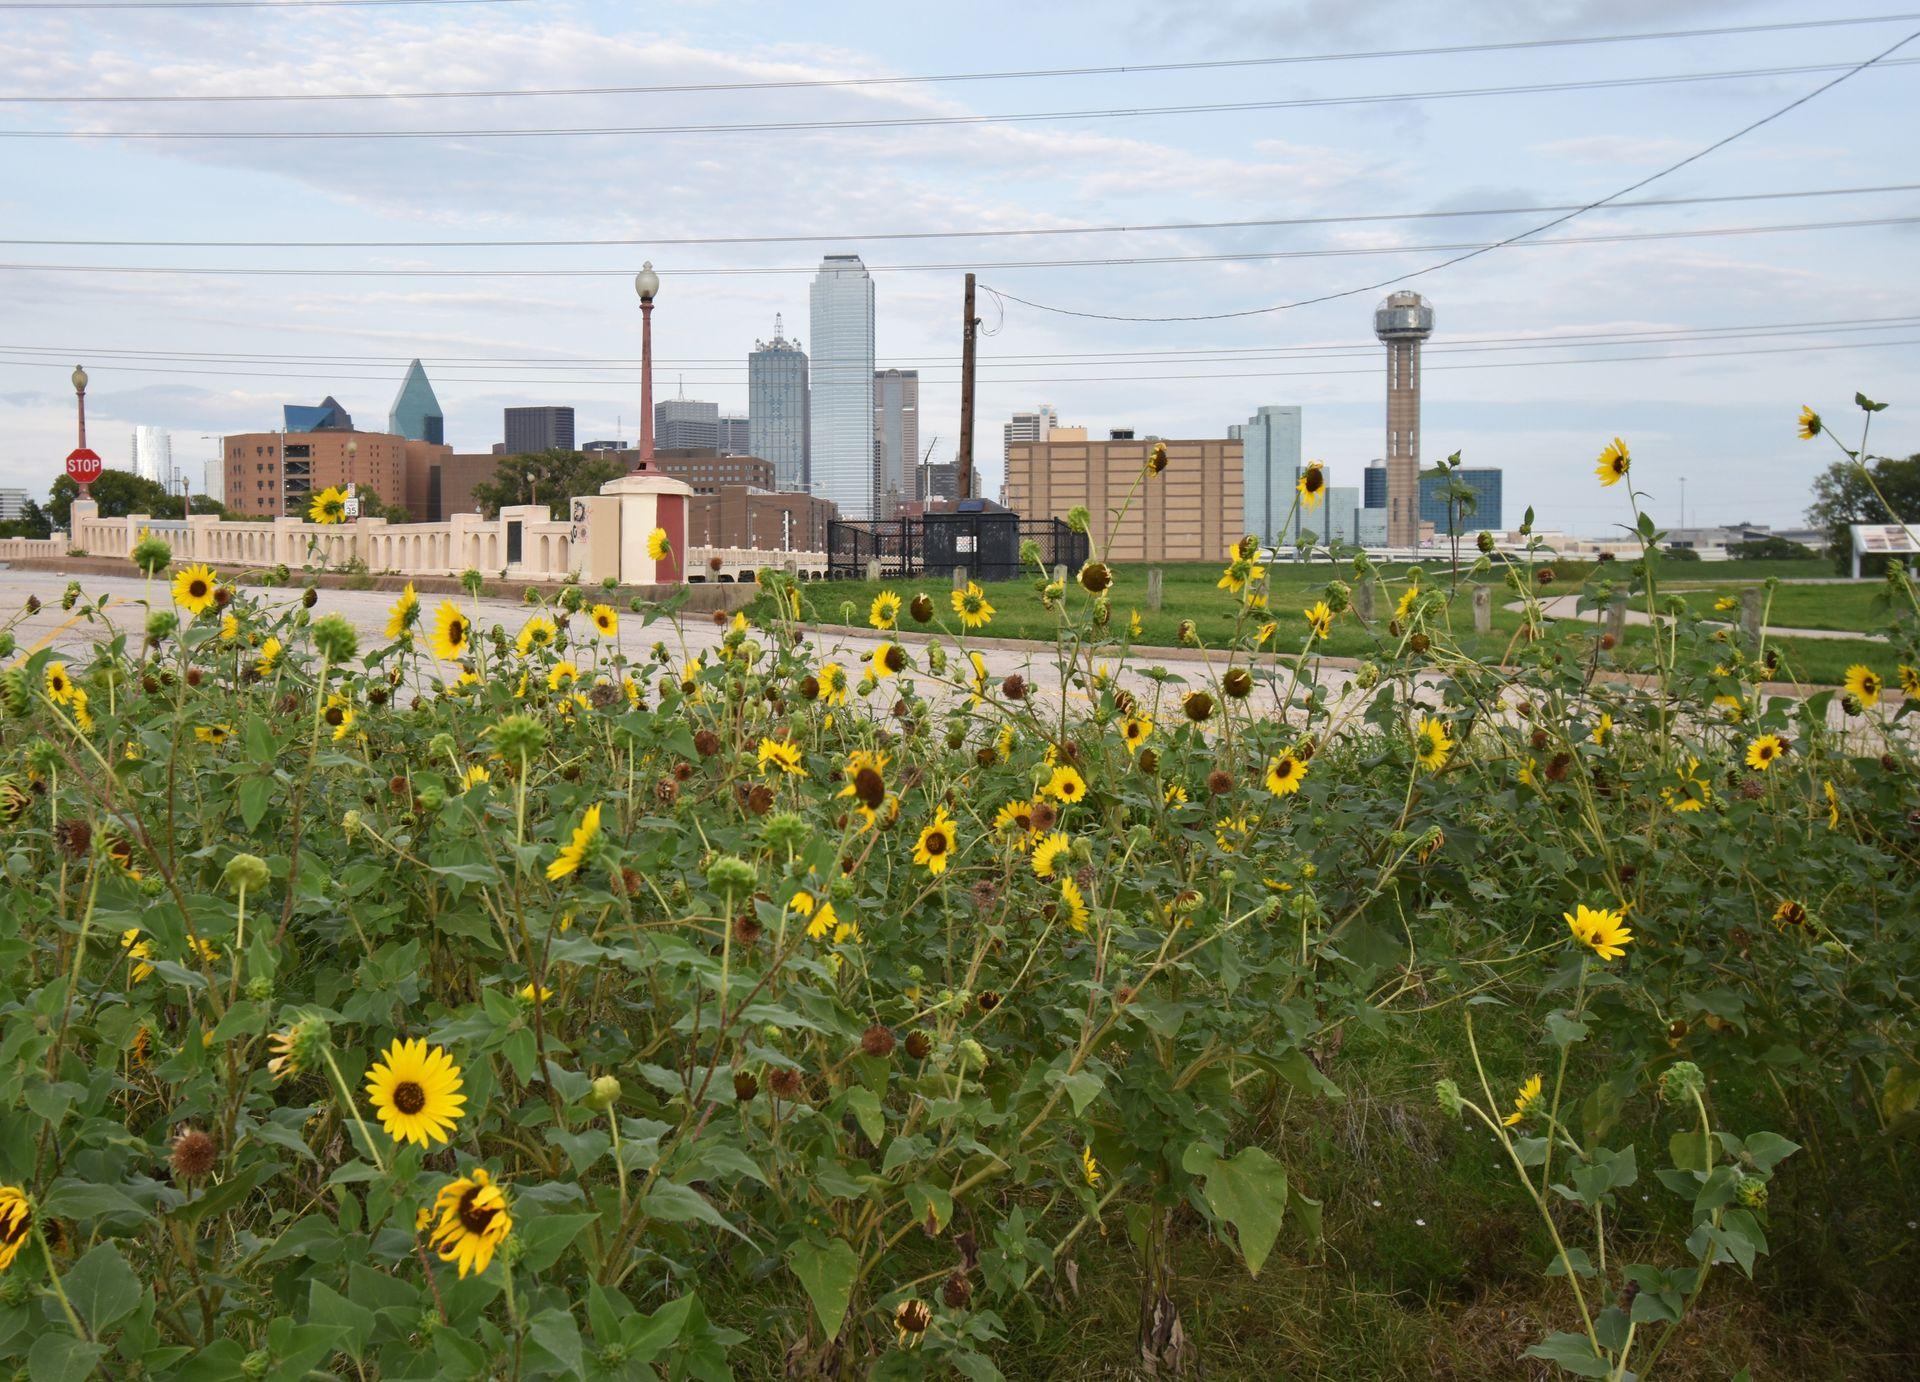 A close up view of sunflowers with the Dallas skyline, including Reunion Tower on the right side, in the background.